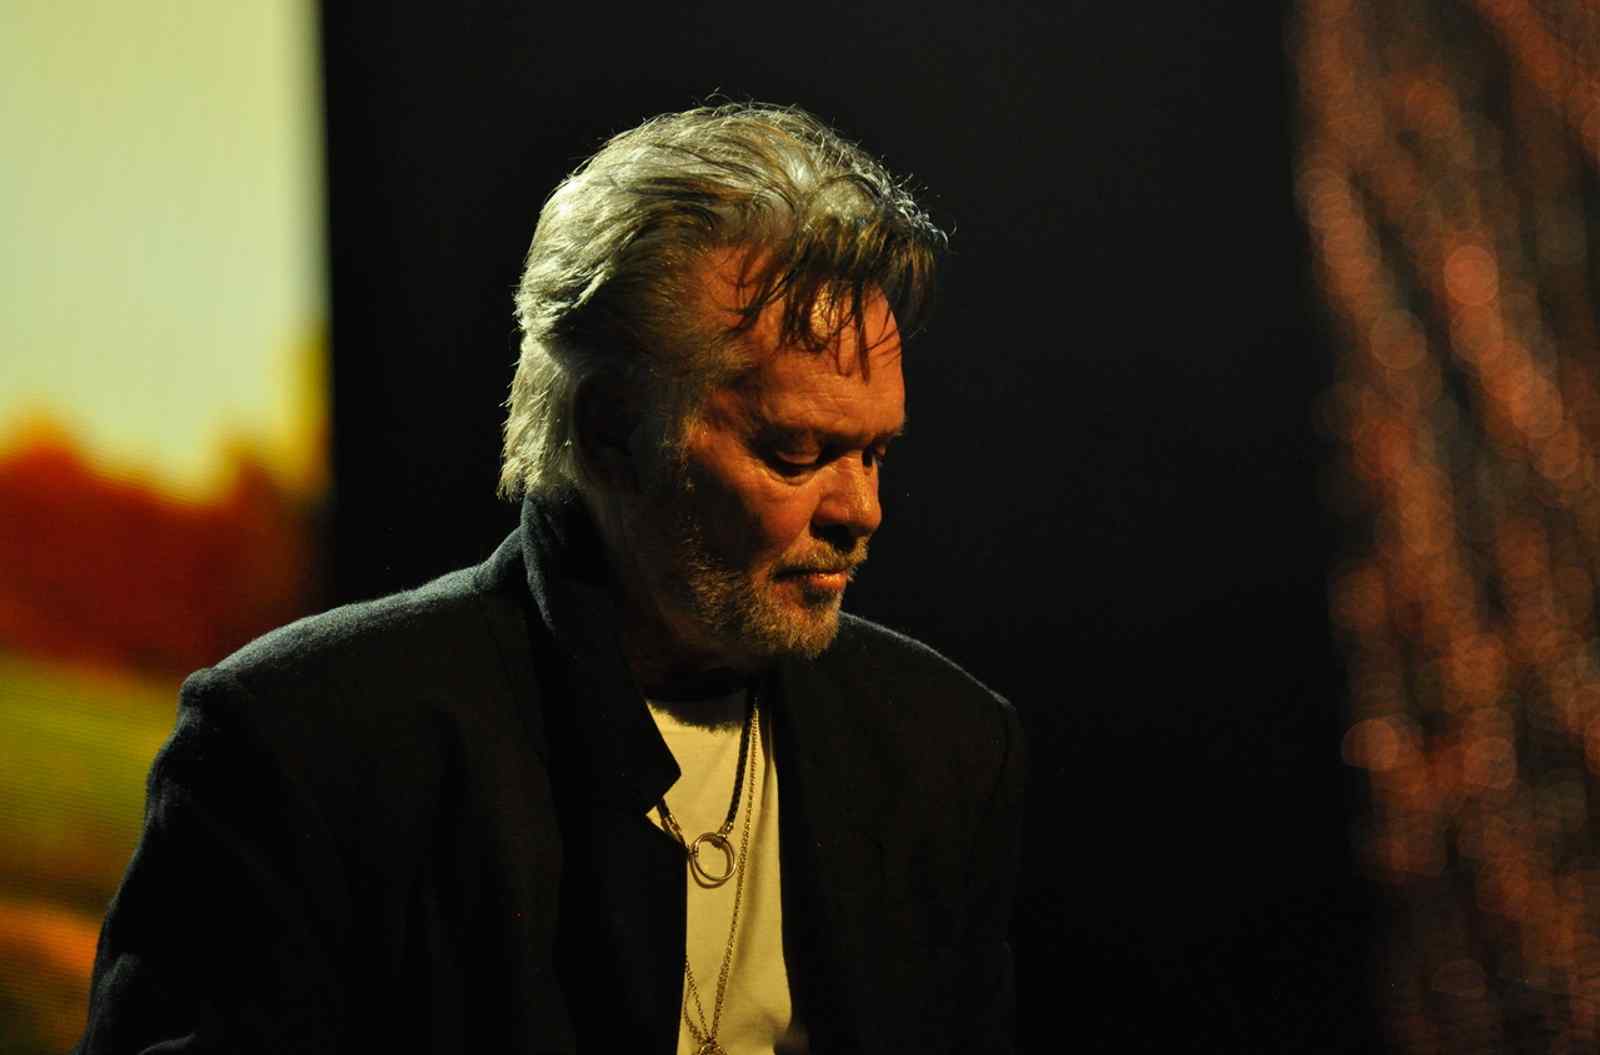 Forbes.com: Sunday Conversation: John Mellencamp On Songwriting, Springsteen, And Why He Is ‘The Luckiest Man’